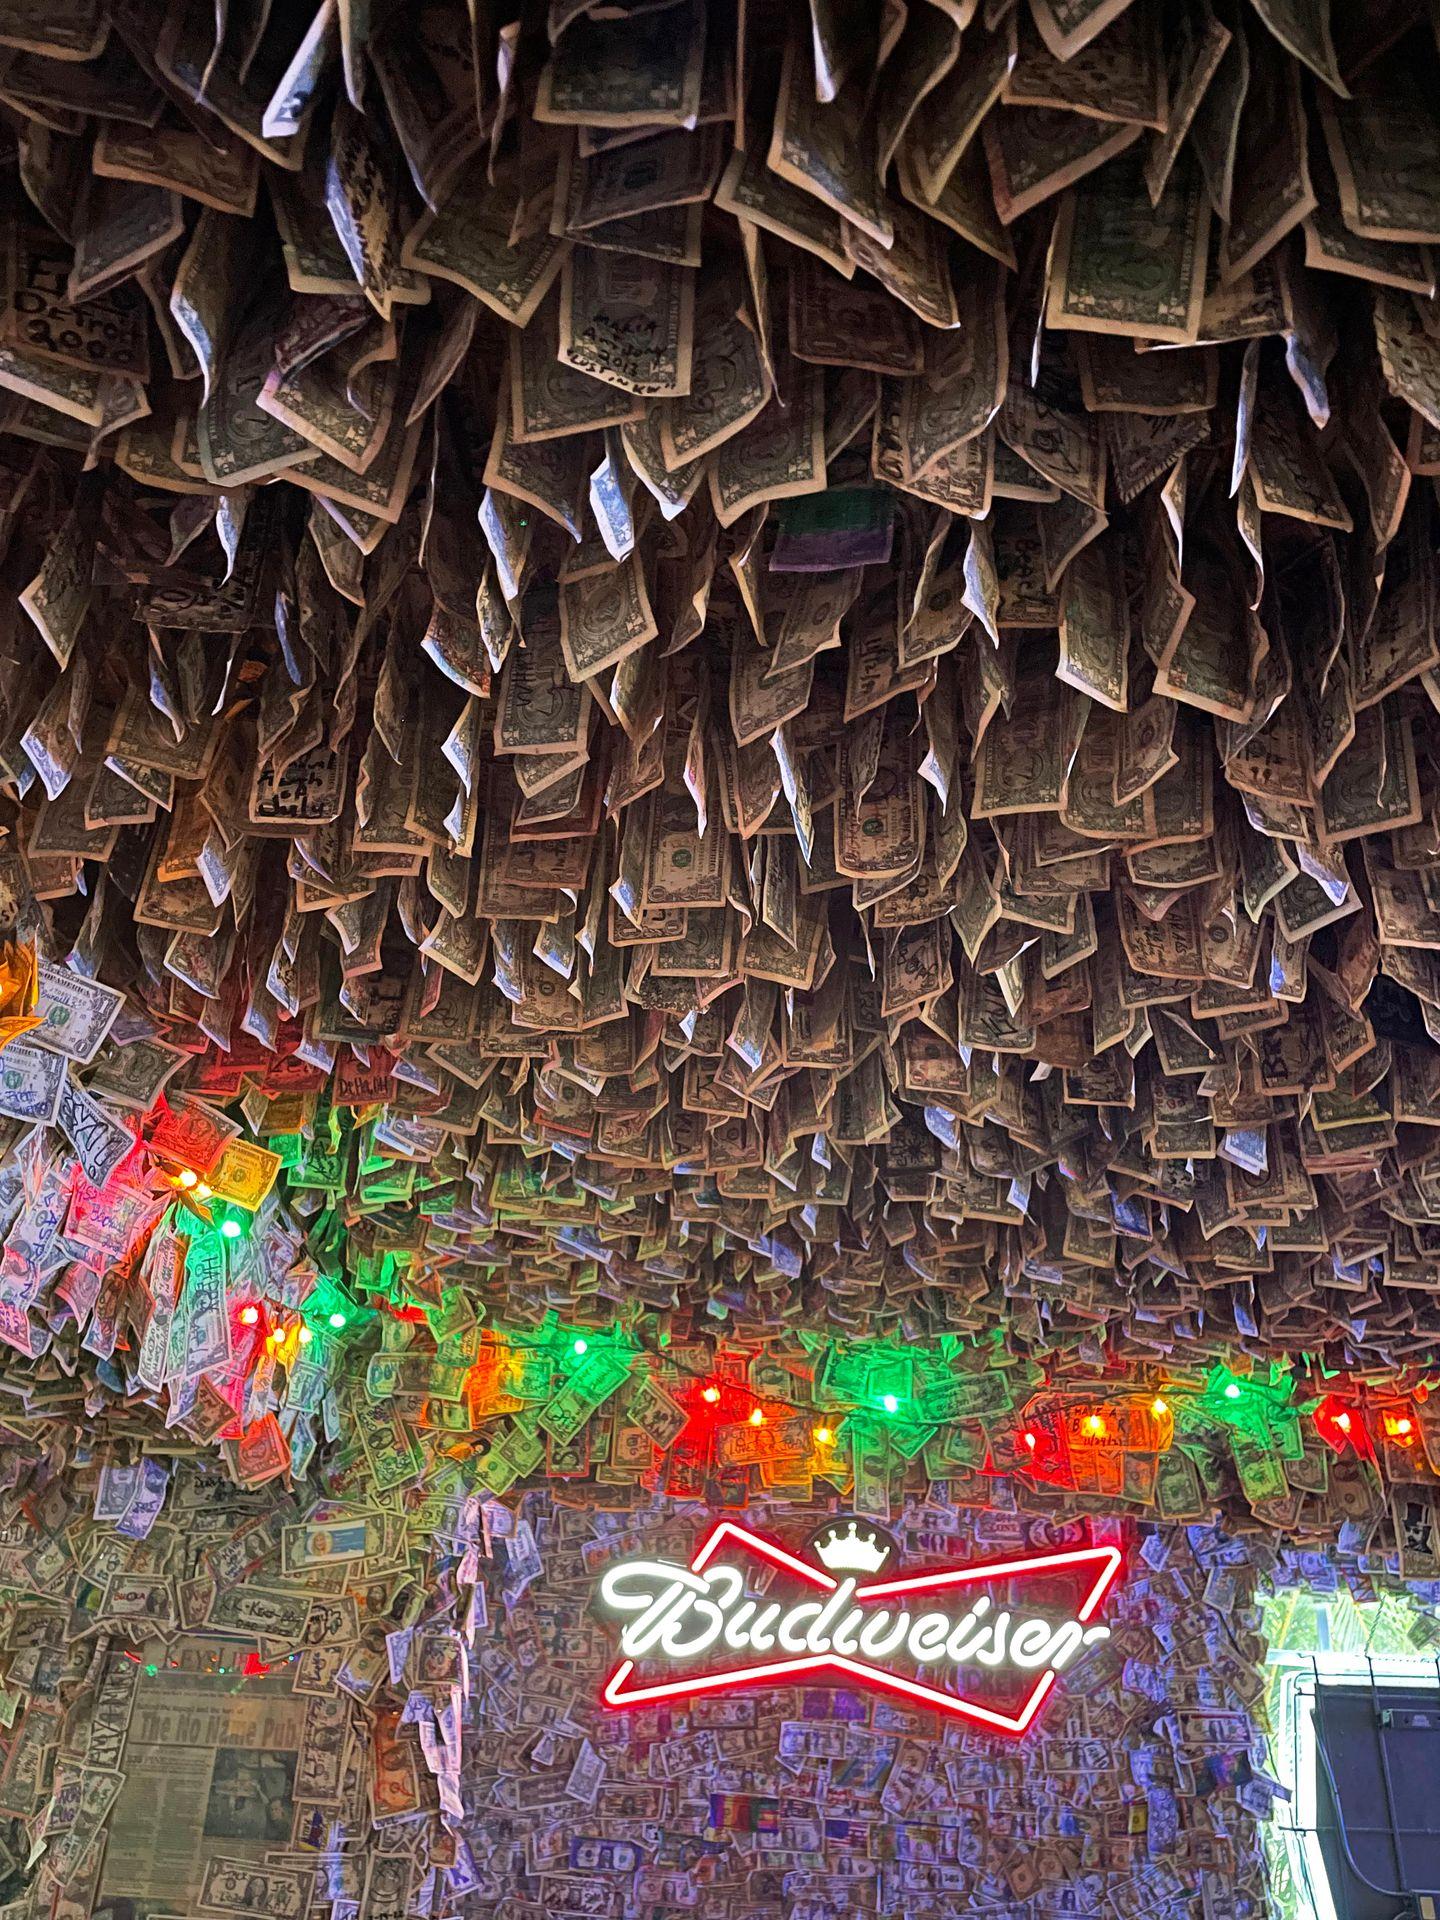 Dollar bills covering the ceiling and walls with a Budweiser neon sign and red and green string lights